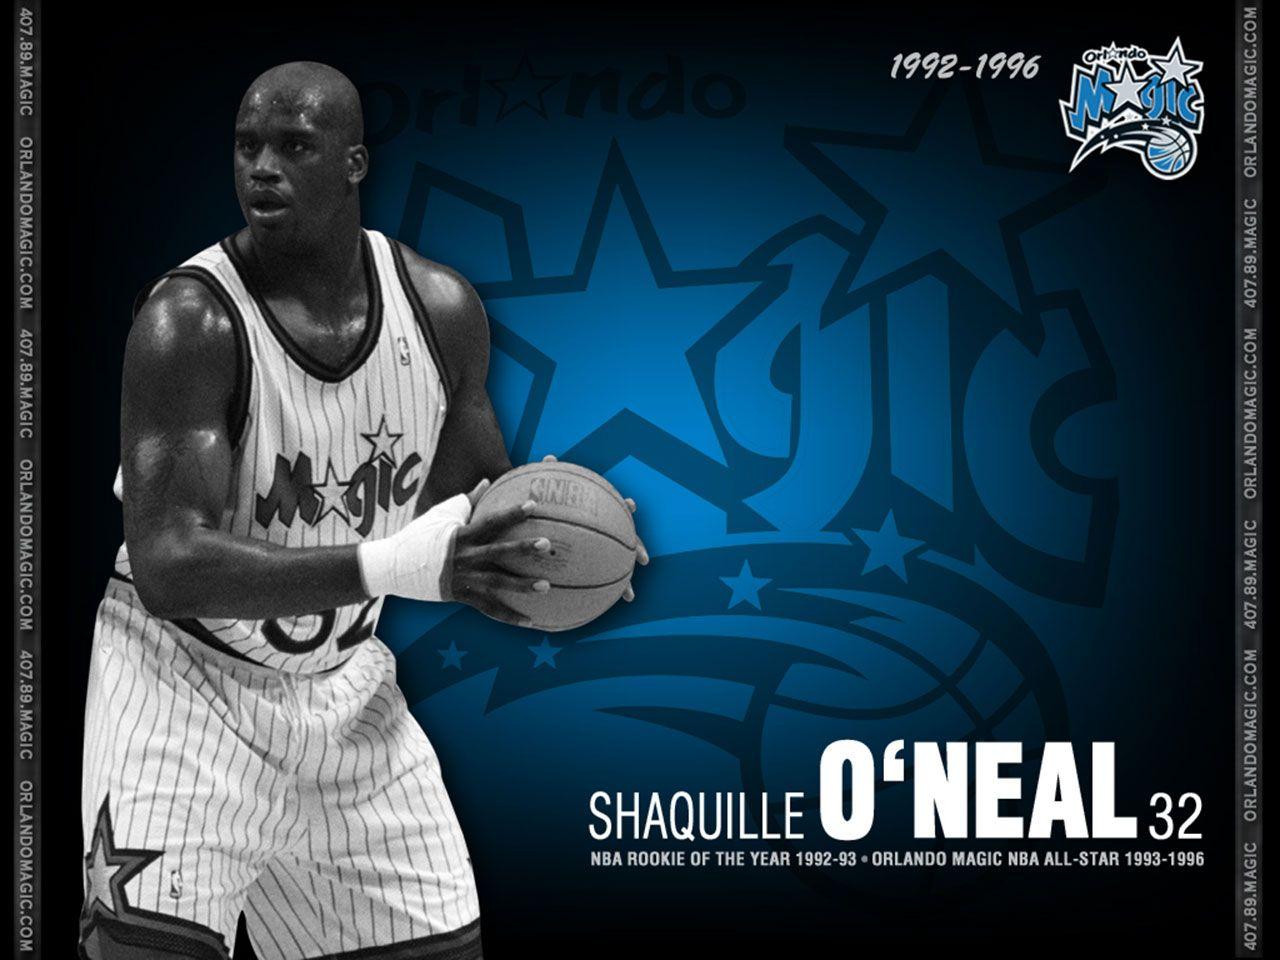 Shaquille O'Neal Professional Basketball Player, Basketball